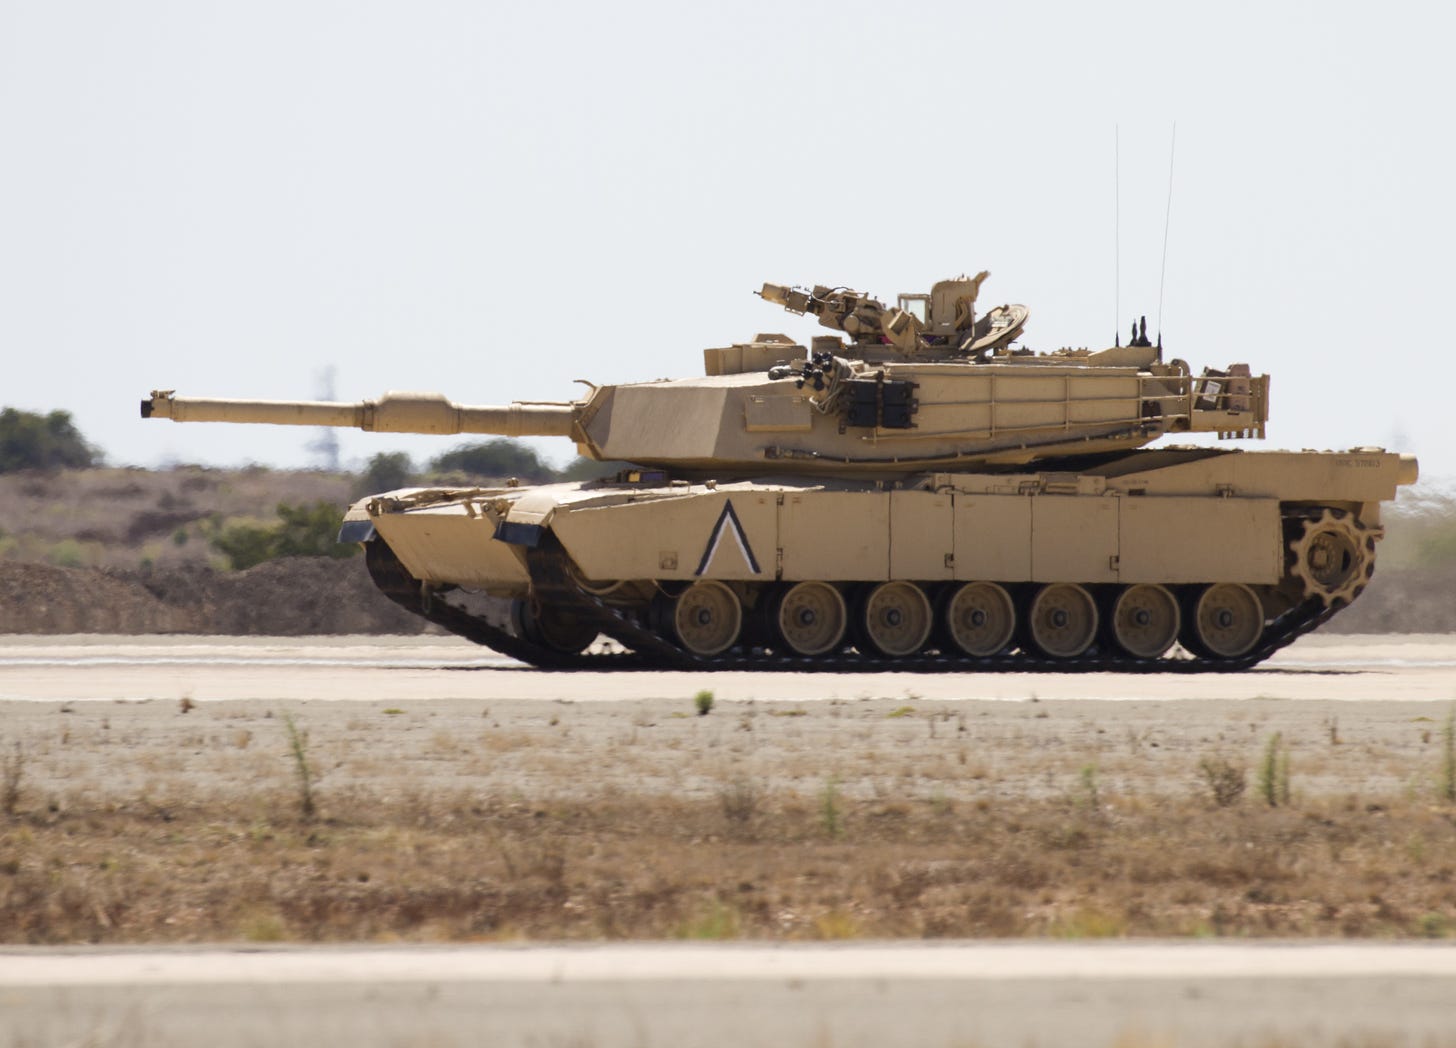 "M1-A1 Abrams Tank" by San Diego Shooter is licensed under CC BY-NC-ND 2.0.